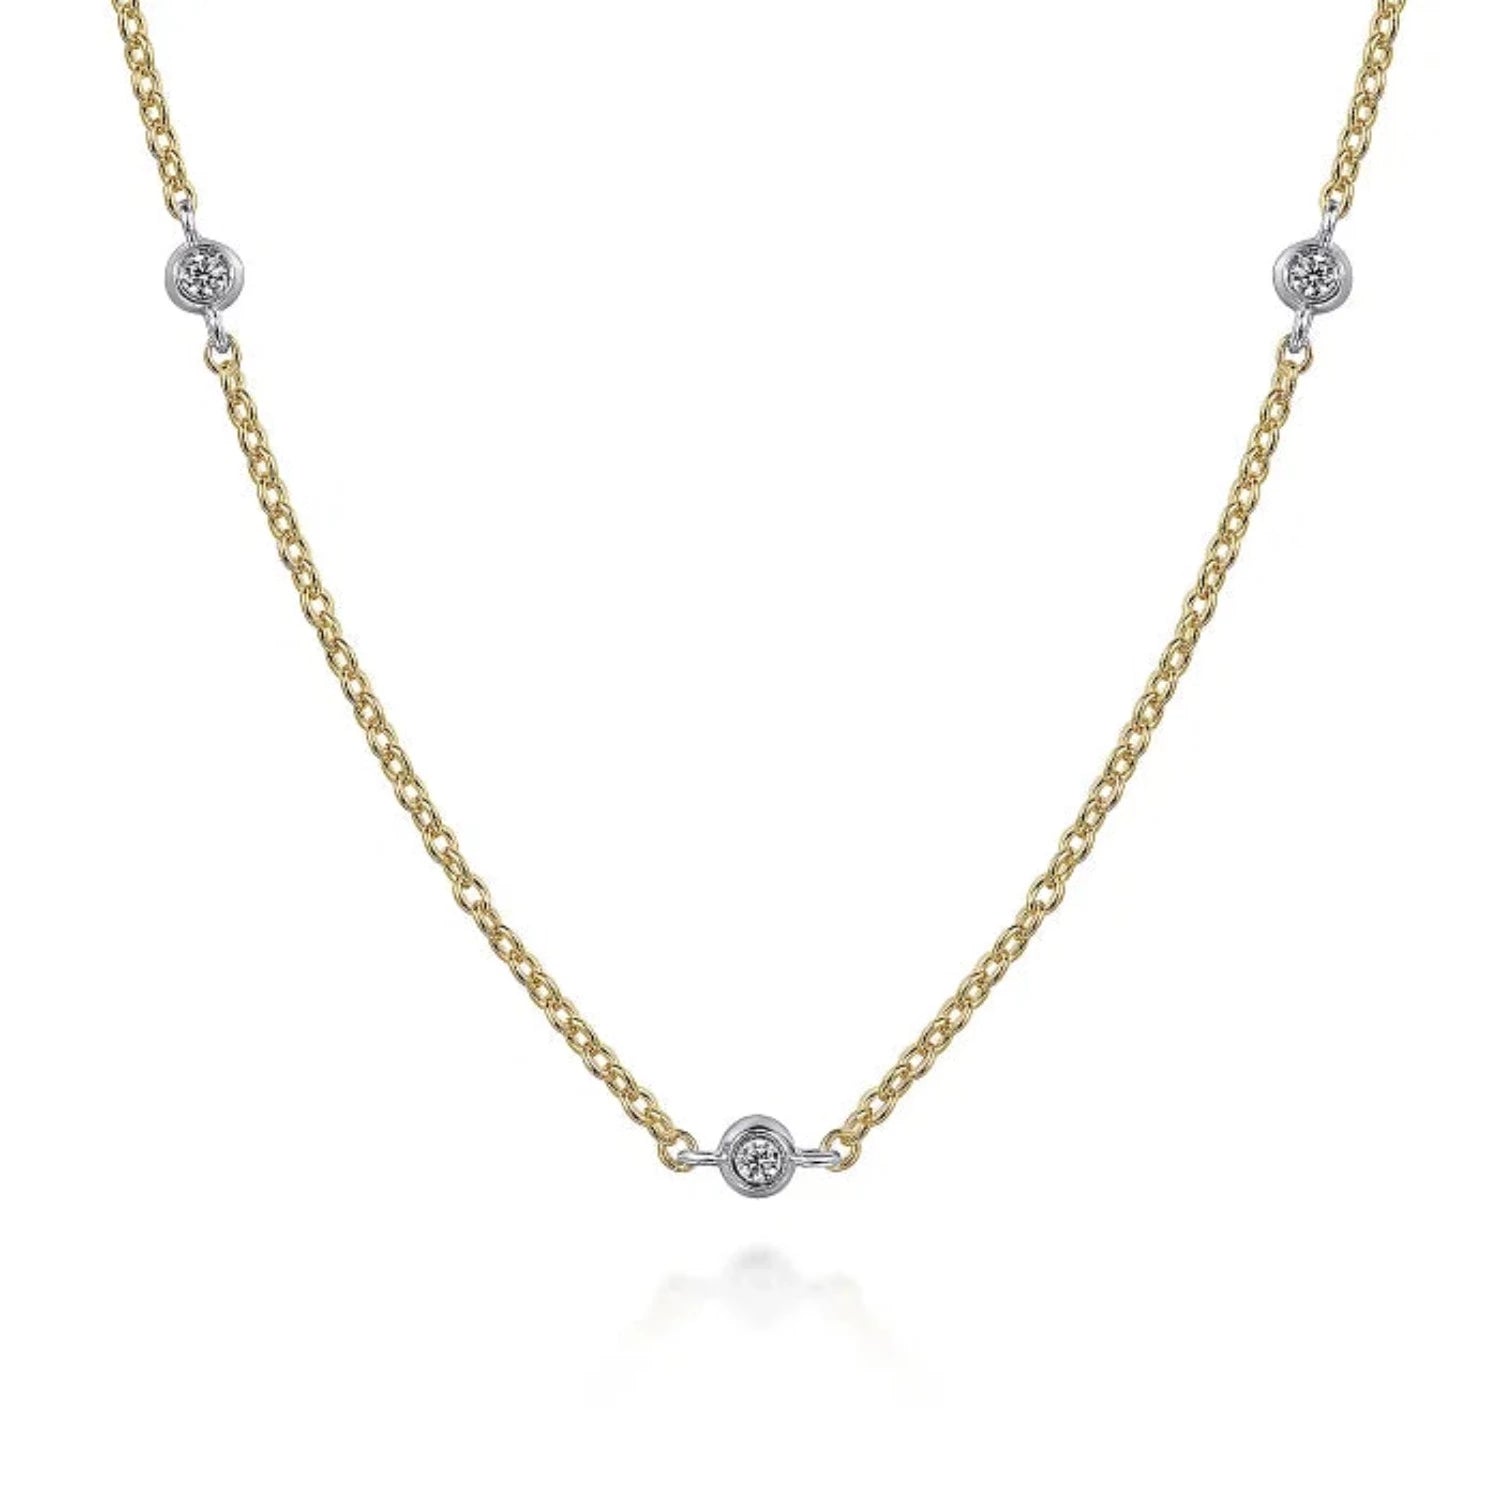 14K White and Yellow Gold Diamond Station Necklace - 002-165-2001099